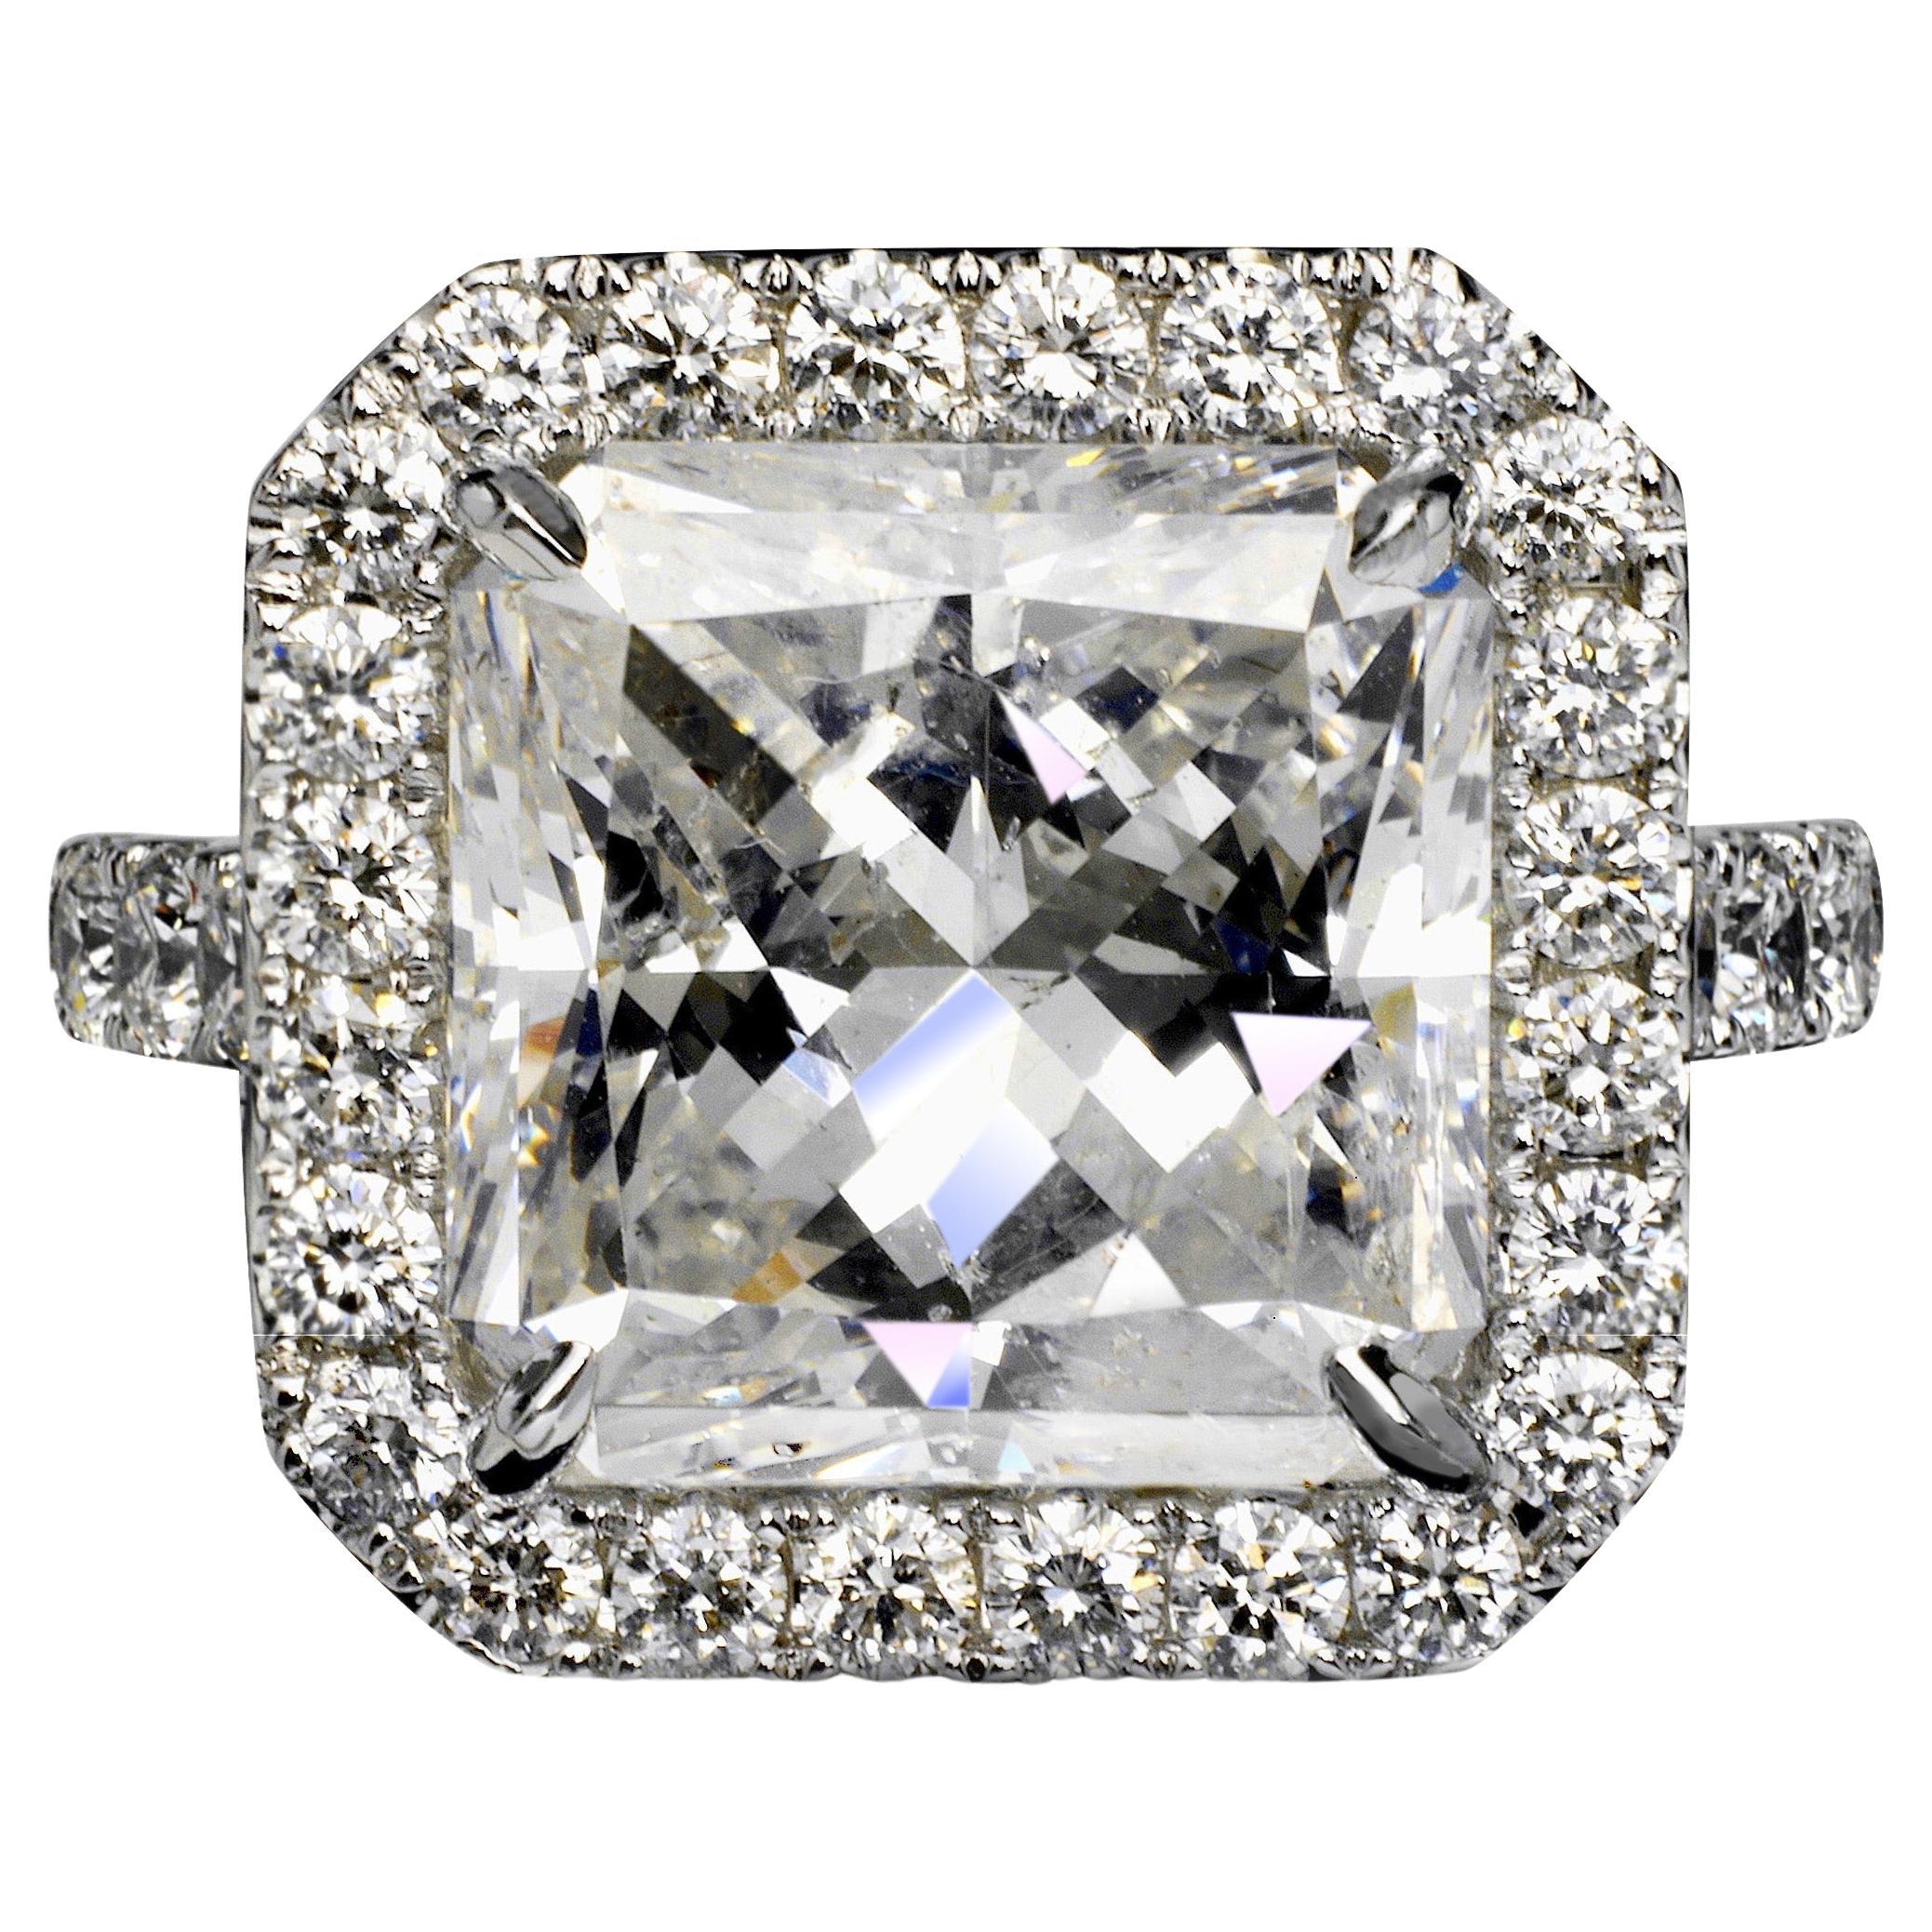 13 Carat Radiant Cut Diamond Engagement Ring Certified E SI1 For Sale